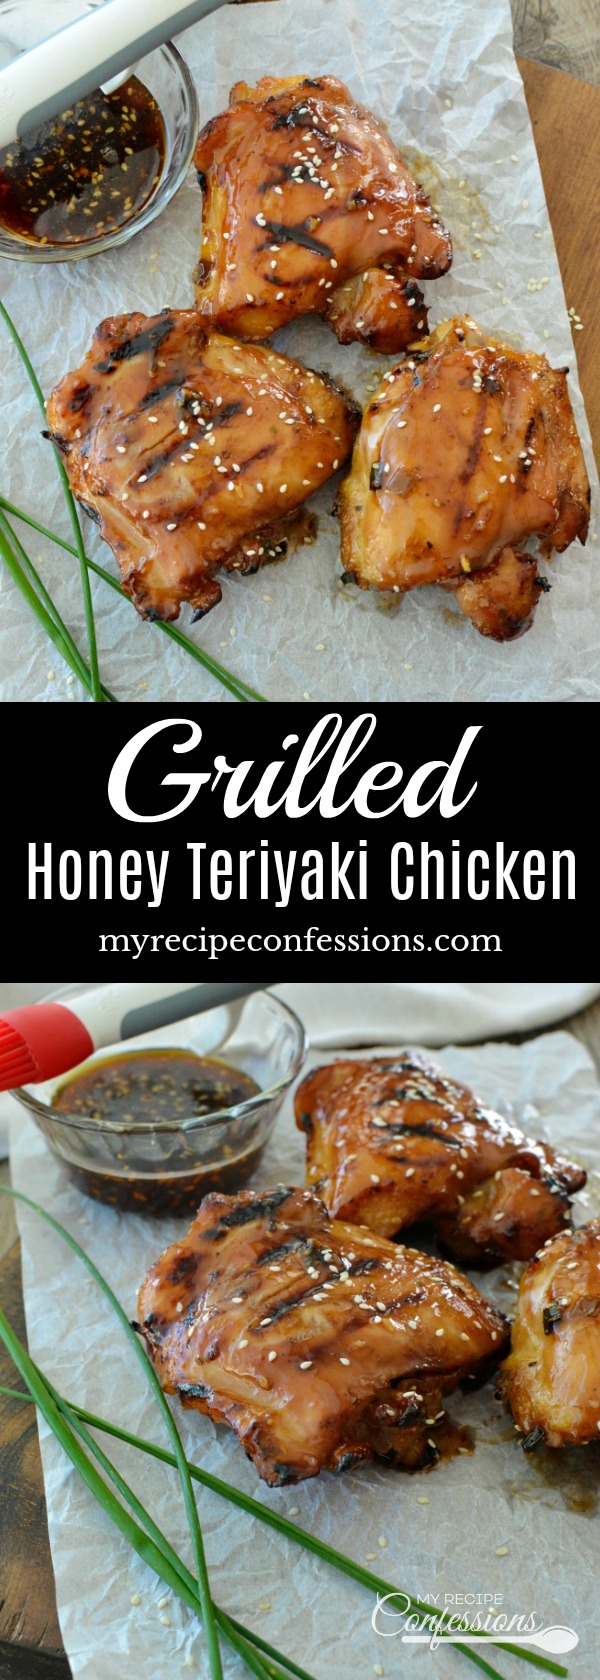 Grilled Honey Teriyaki Chicken will quickly become your favorite recipe! The marinade is out of this world and makes the the chicken thighs so dang moist. I can't believe how flavorful and tender this chicken is. They are so easy to make and  so incredibly amazing!  